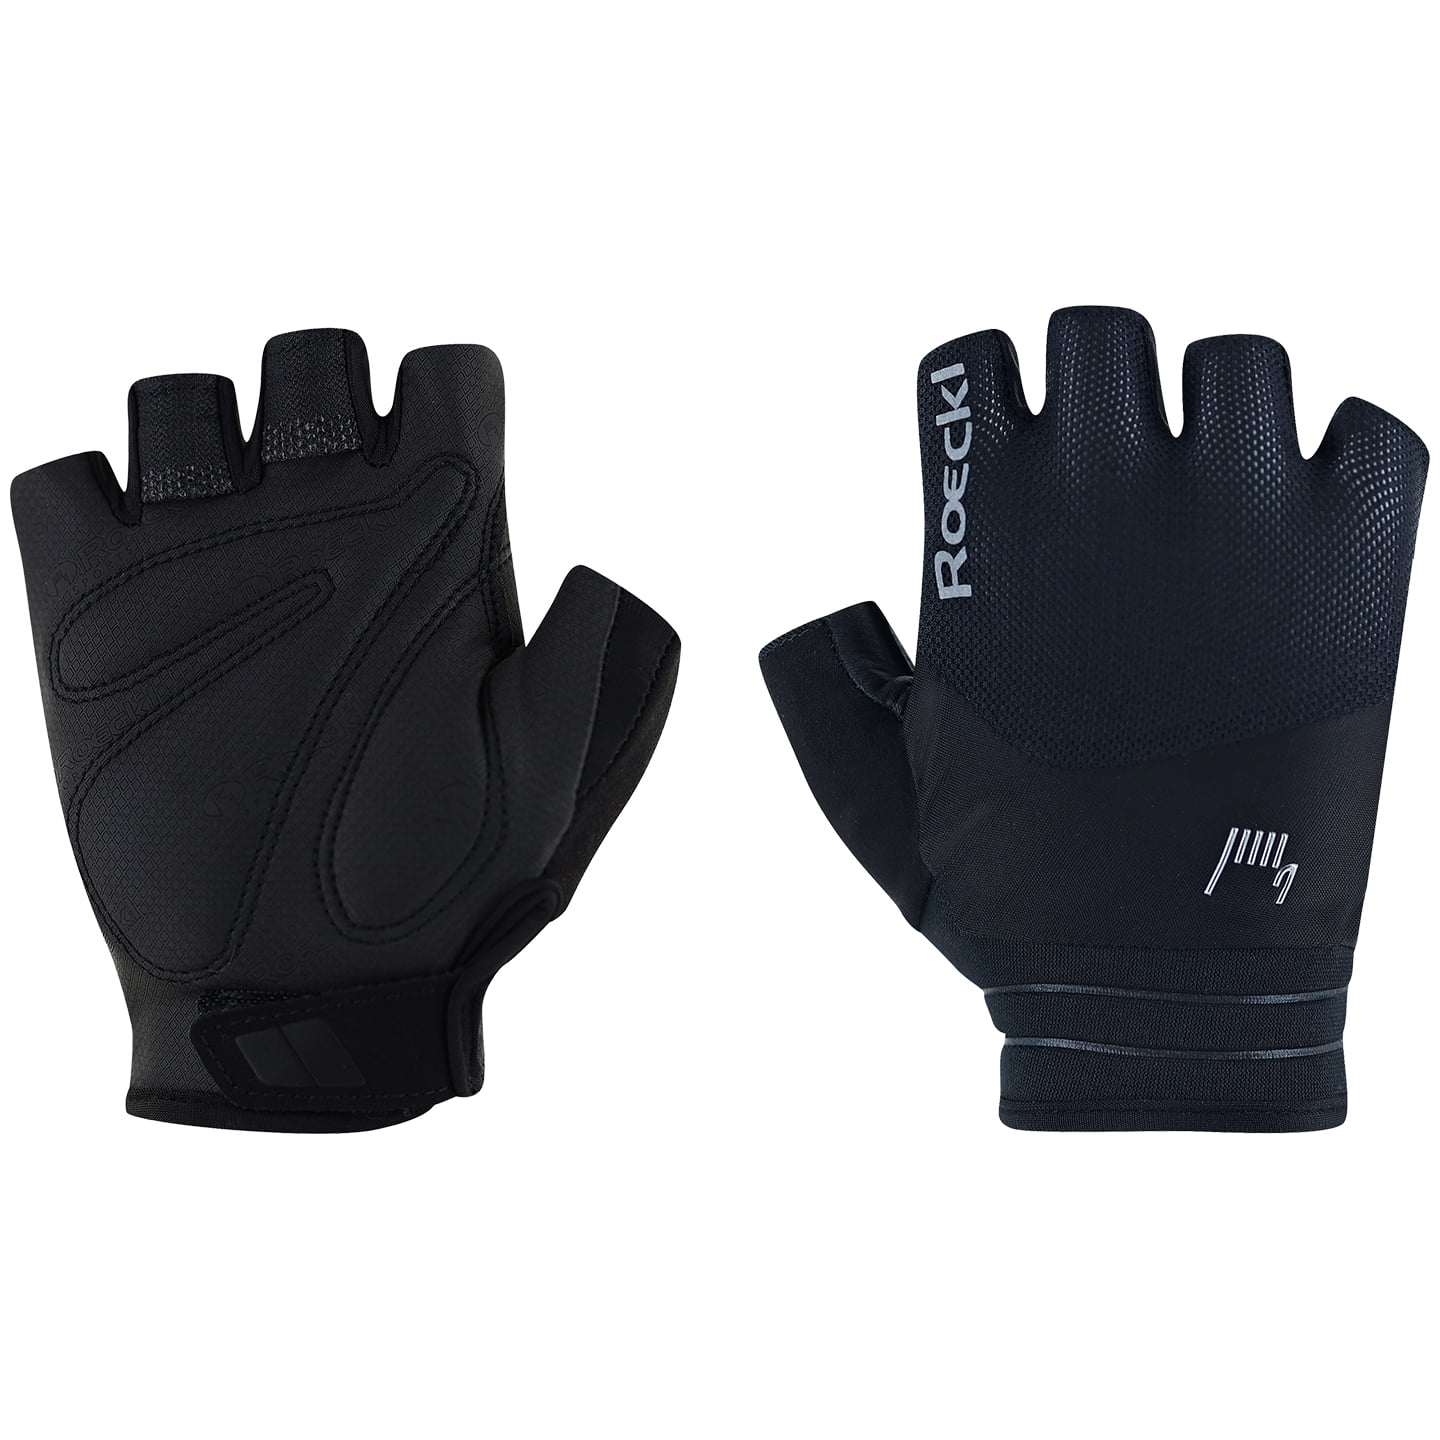 ROECKL Bonau Gloves, for men, size 10, Cycle gloves, Cycle wear